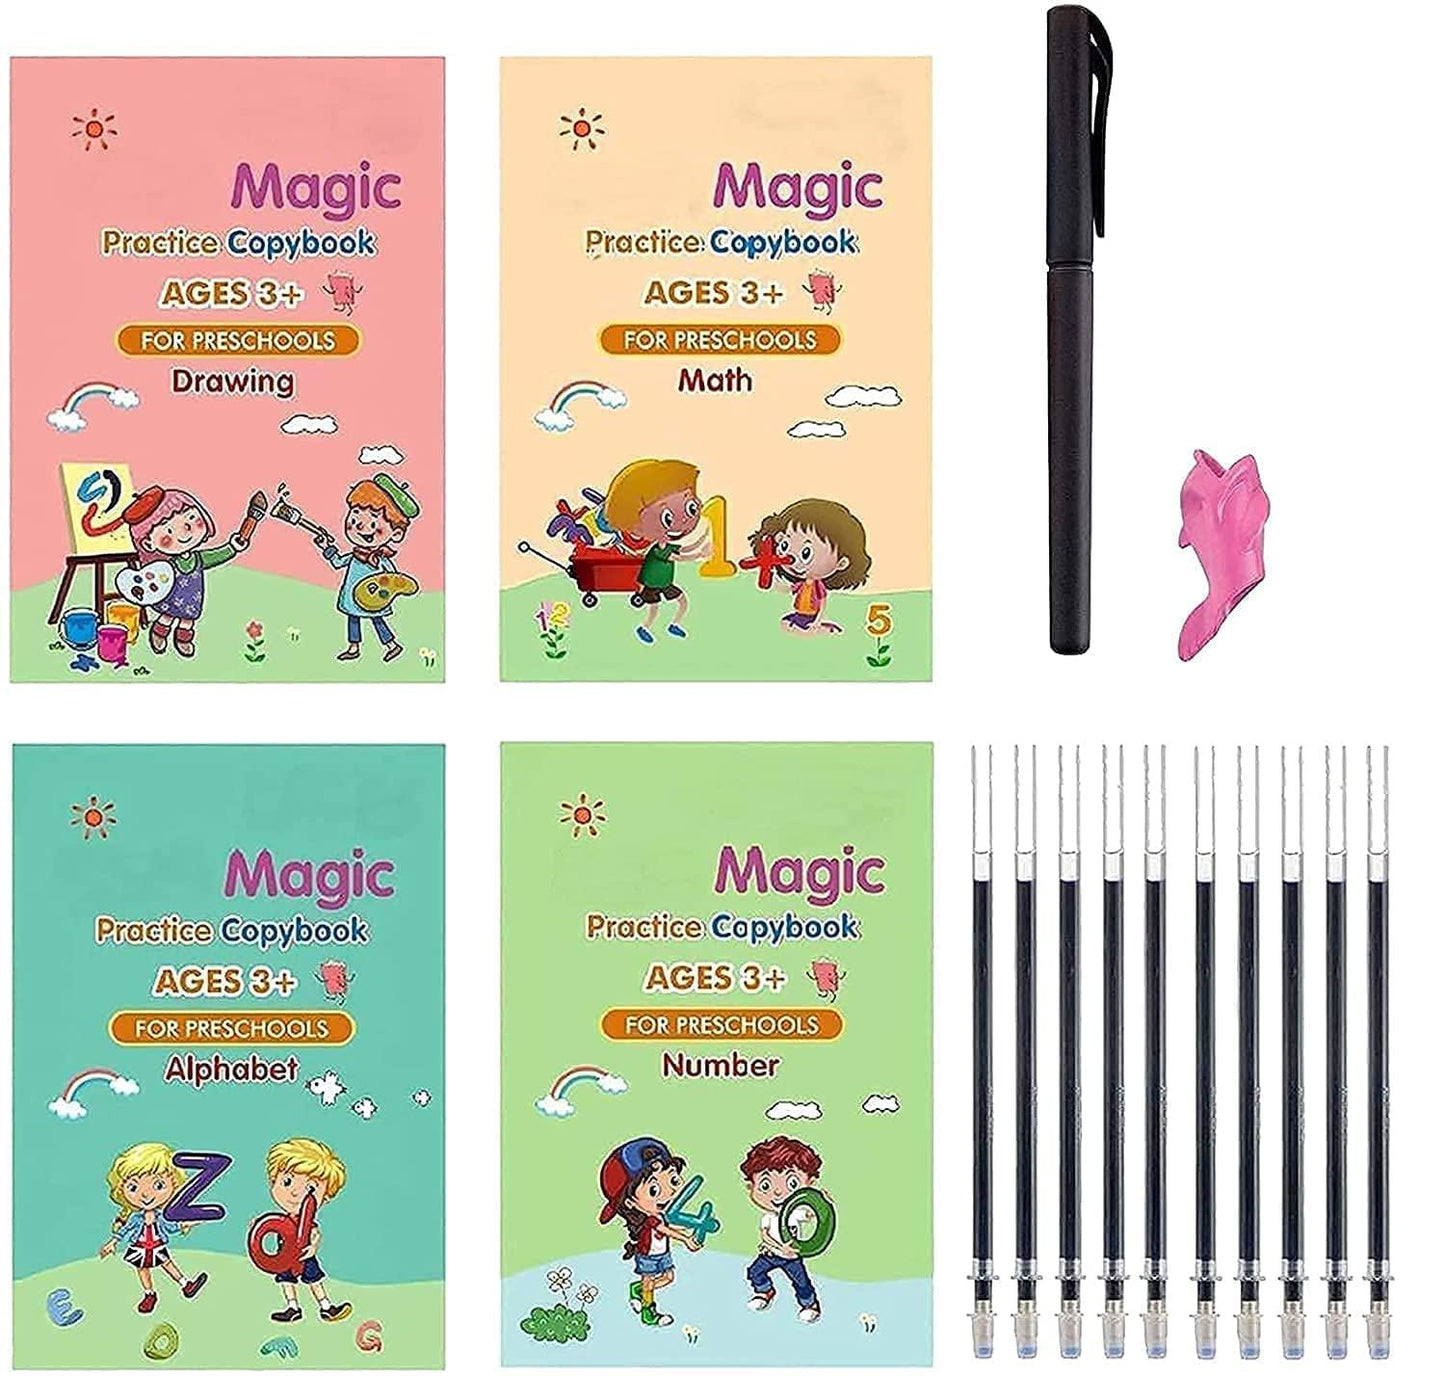 8PCS/Set Books , 2Pen , 2Grips , 20refils , (pack of 2 ) Magic Practice Writing Kids Reusable Learning Copybook Reading and Writing Book Education Stationery Books + Pen Set